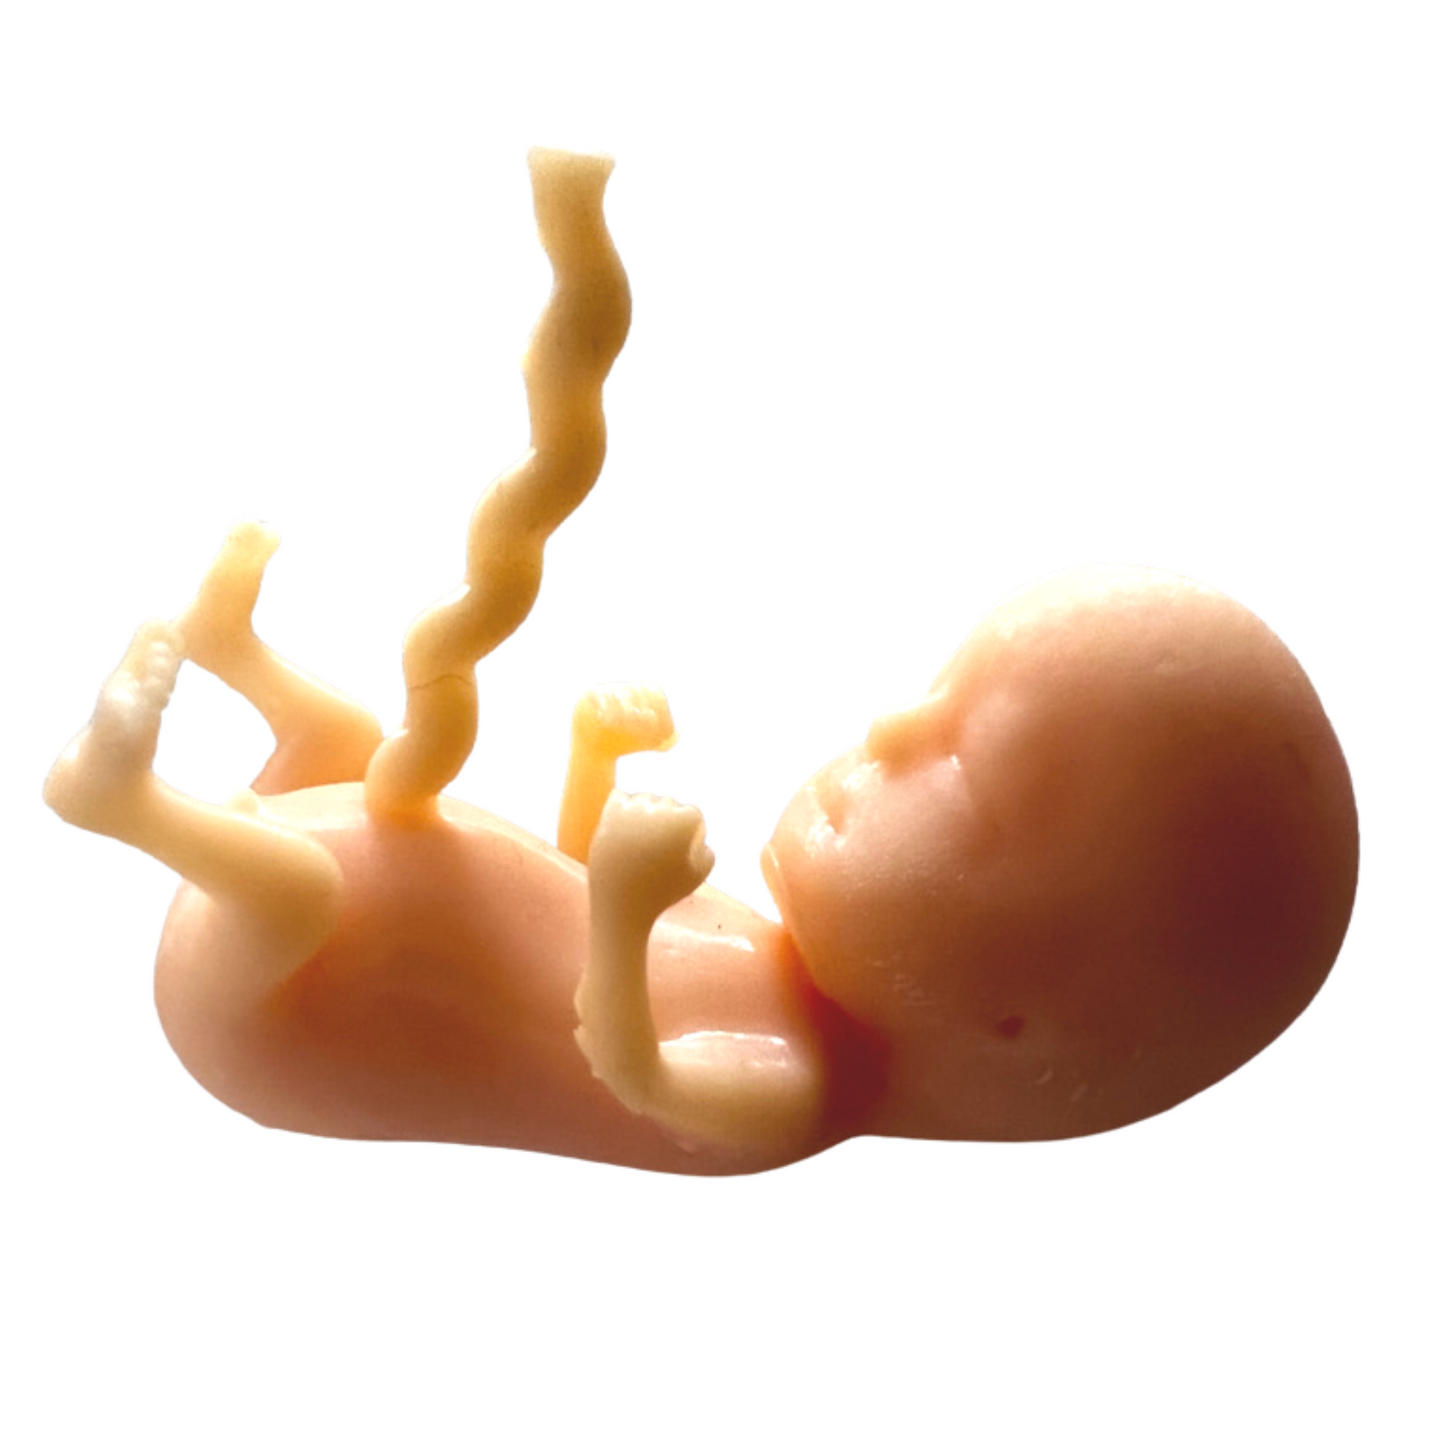 3D printed model of 14 week fetus shows fingers, toes, ears, sex organs and umbilical cord for prenatal education purposes.